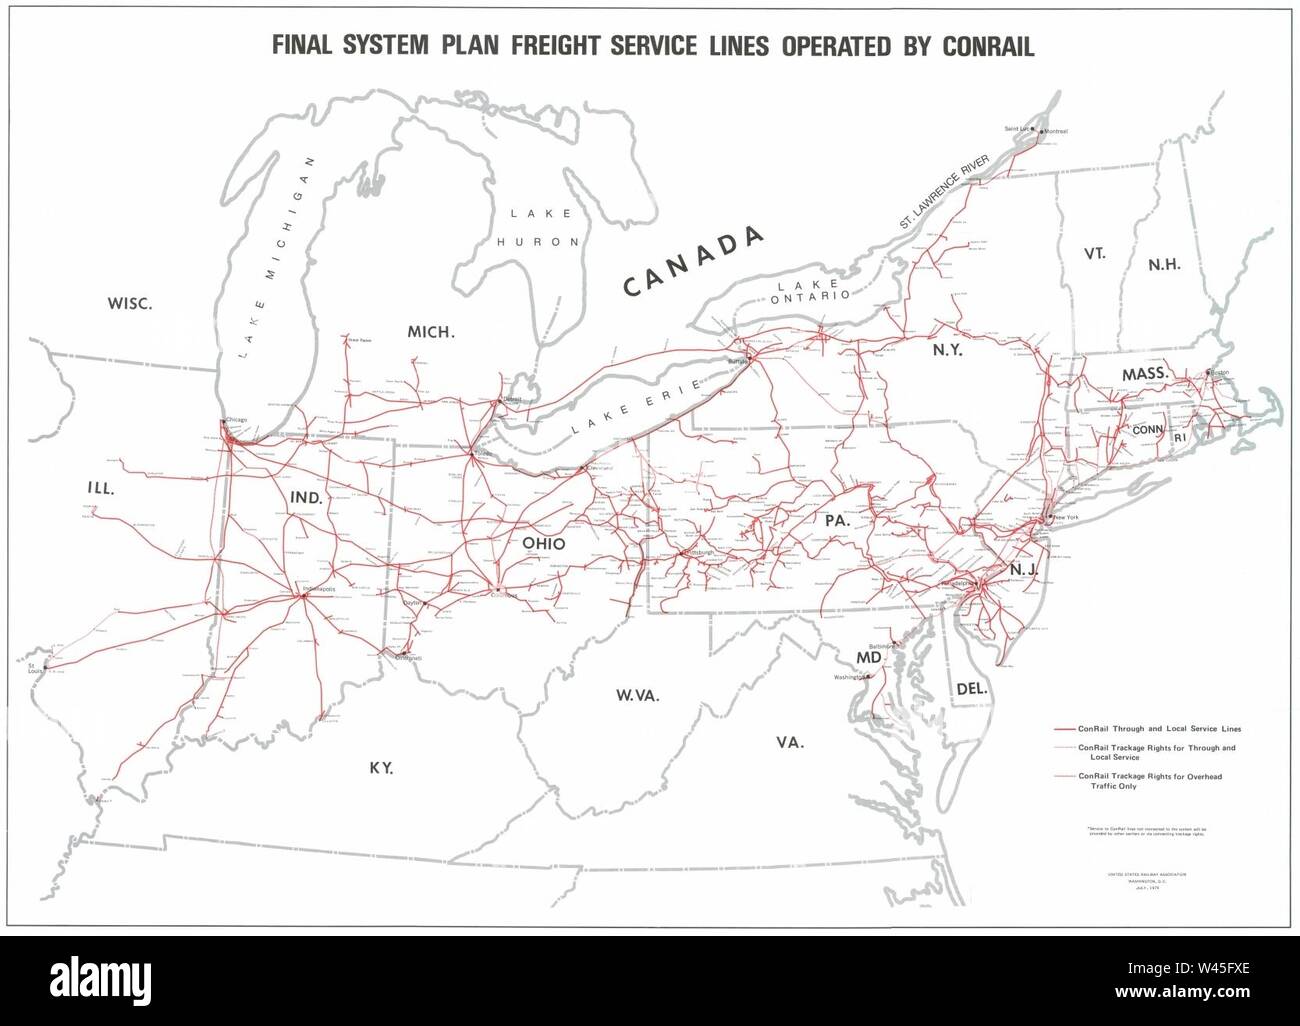 Conrail FSP Freight Lines Map 1975. Stock Photo